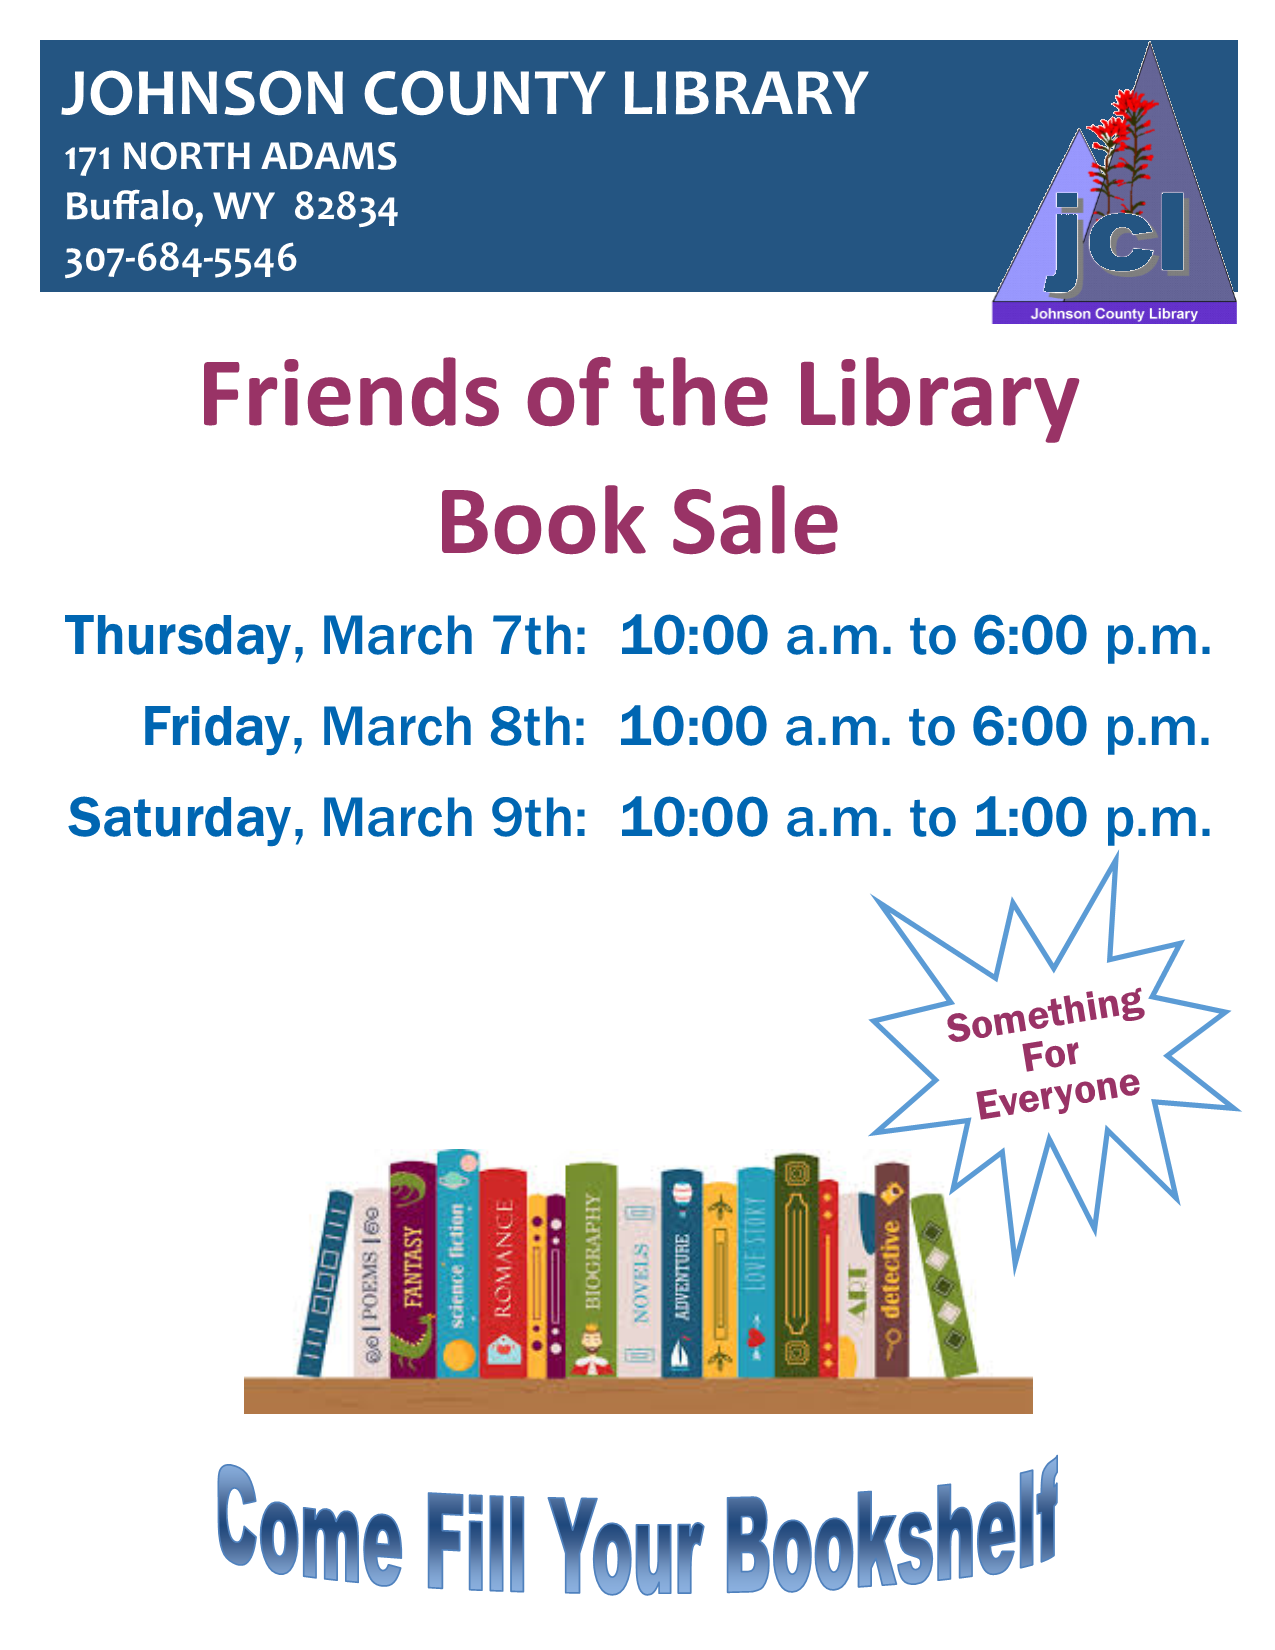 Friends of the Library Book Sale Image